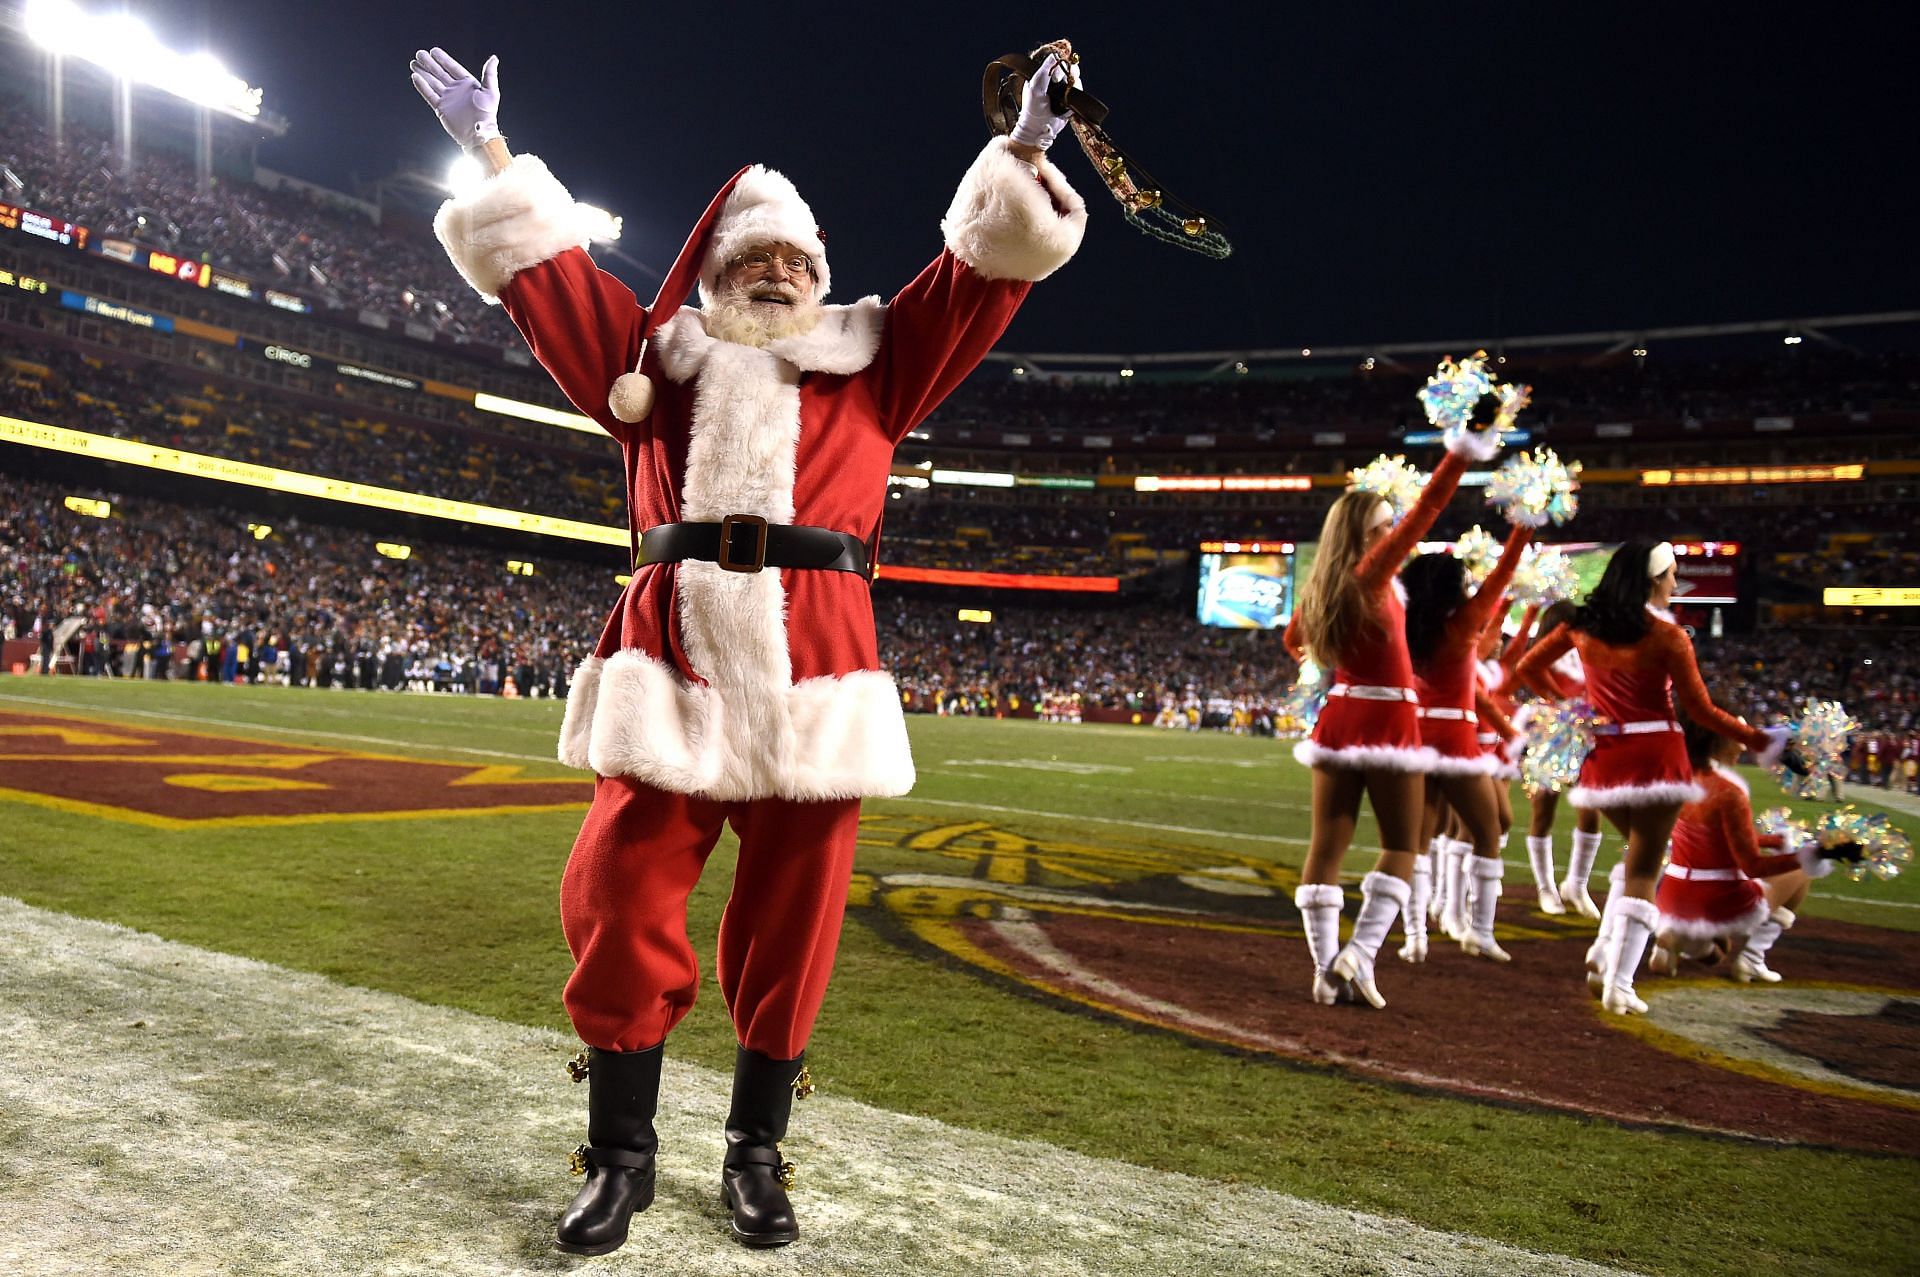 nfl games christmas day 2022